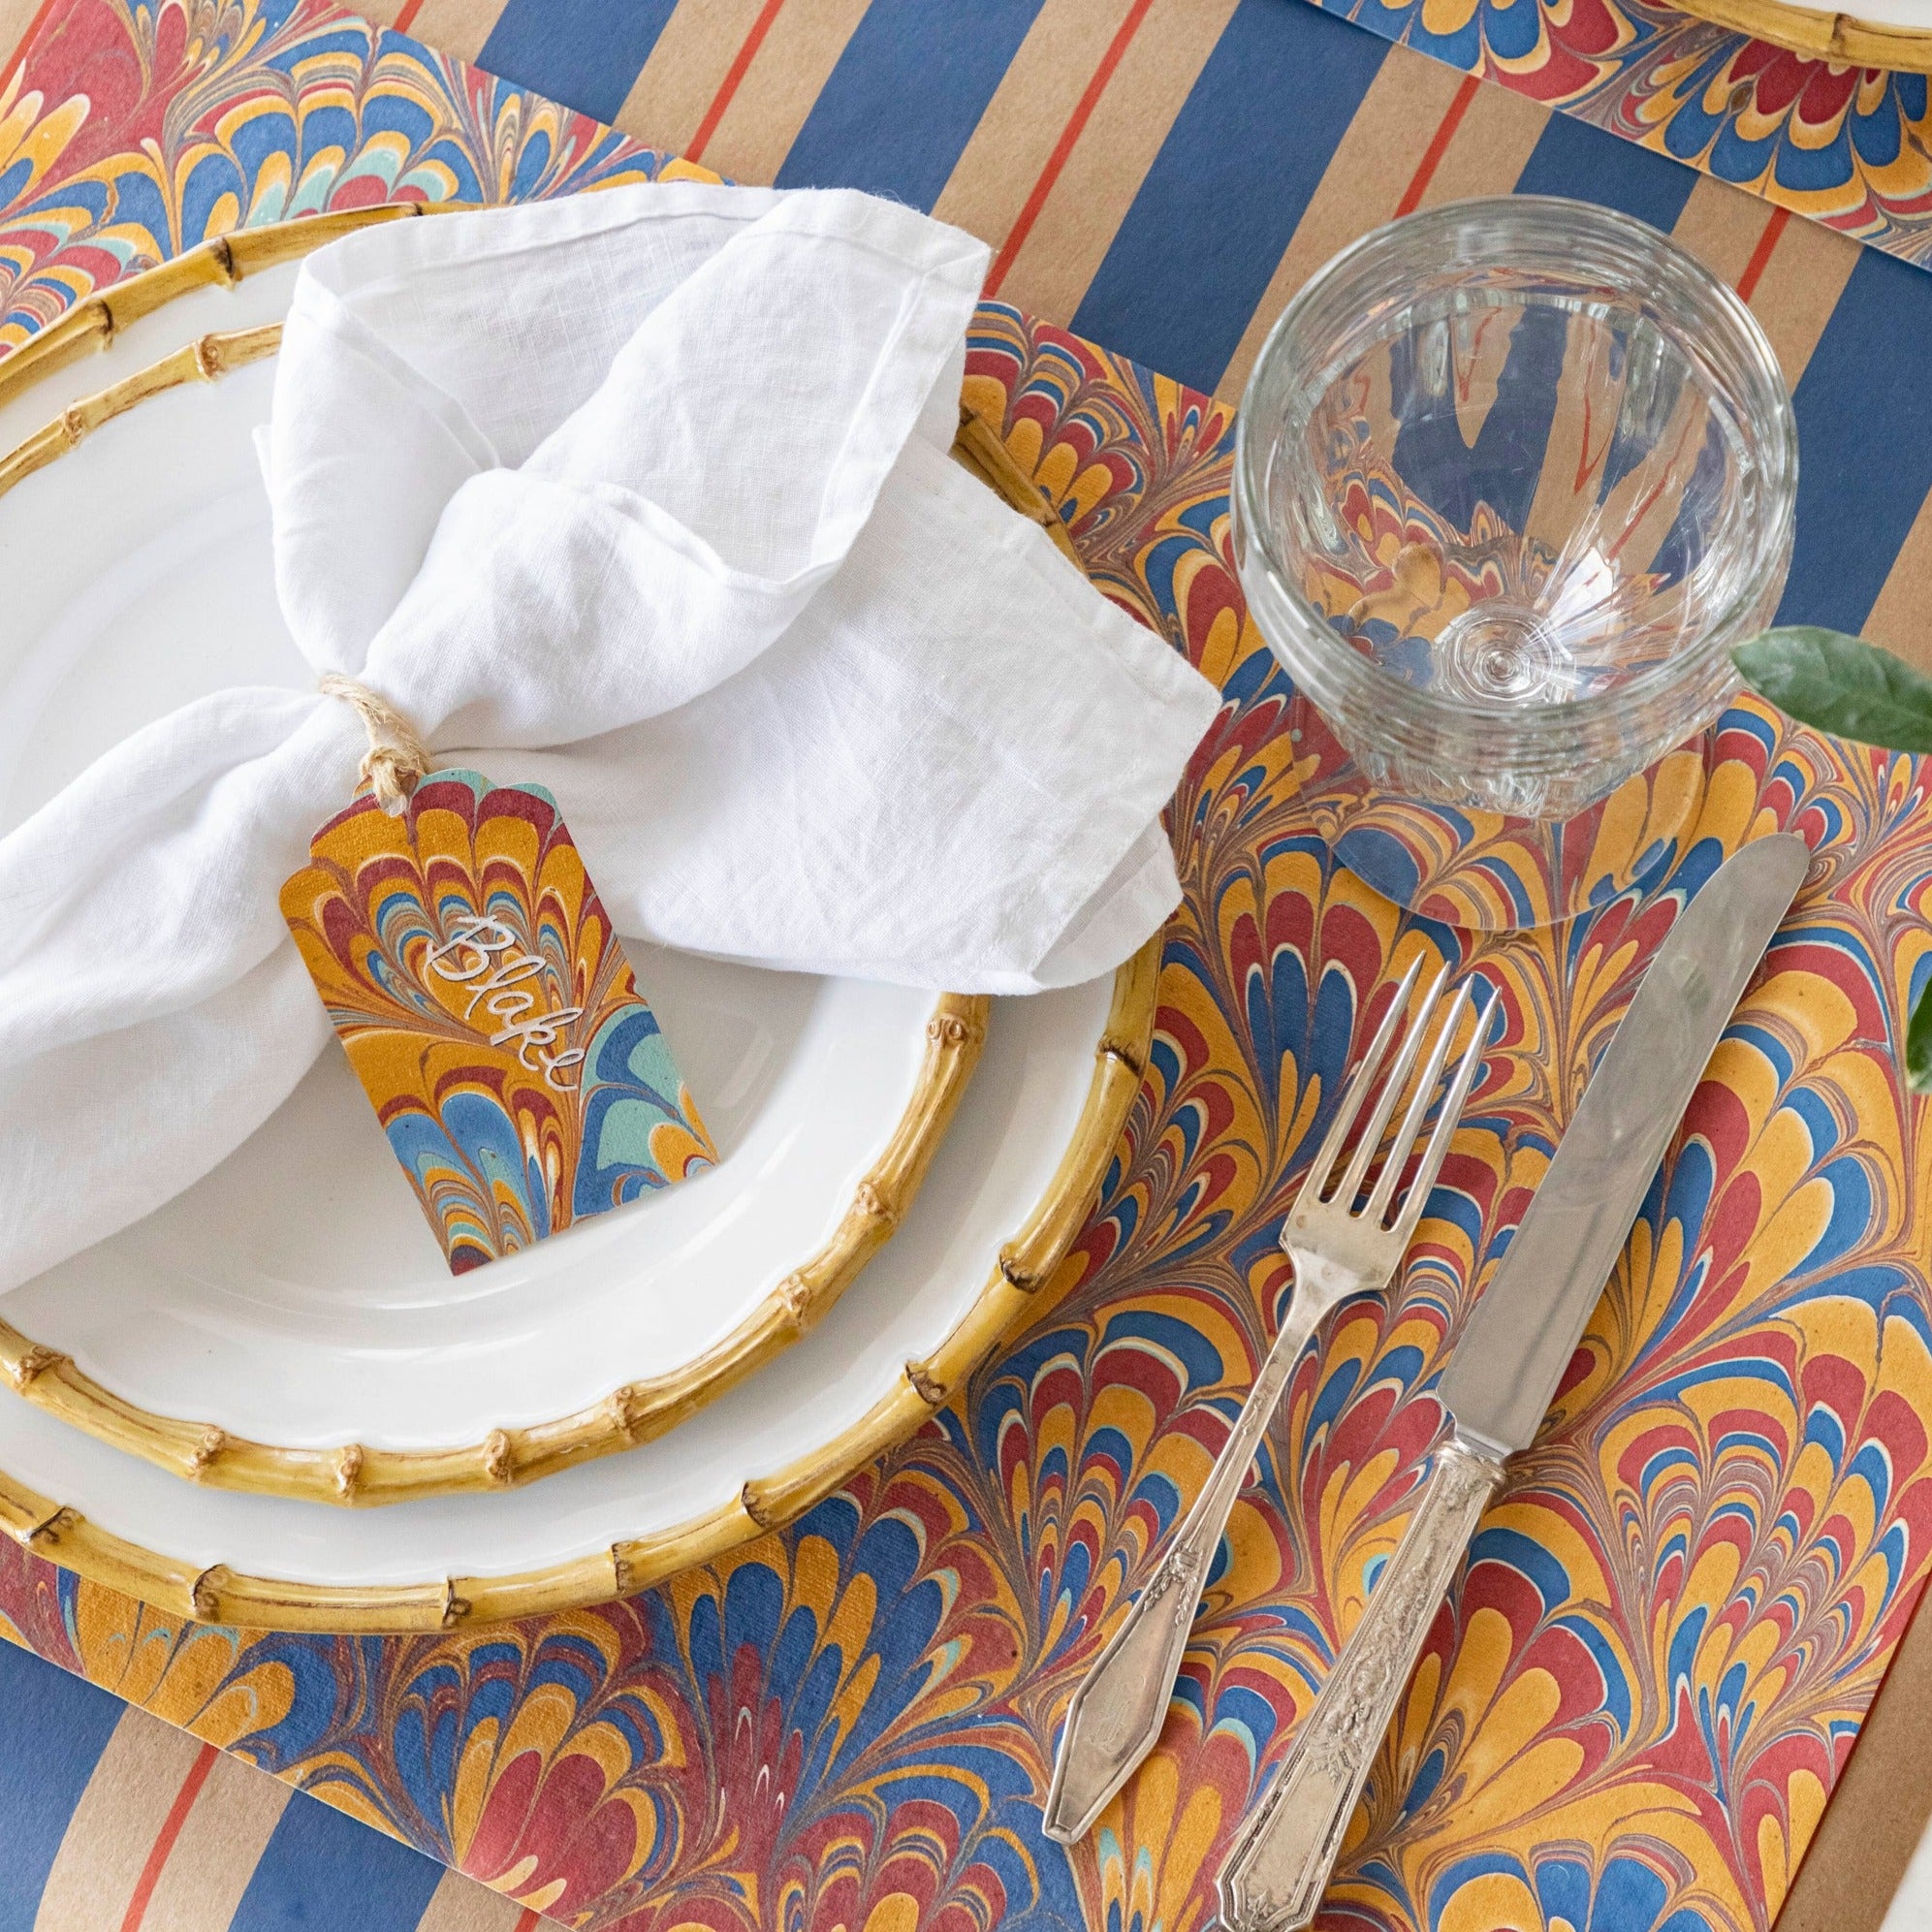 The Red &amp; Blue Peacock Marbled Placemat under an elegant place setting.